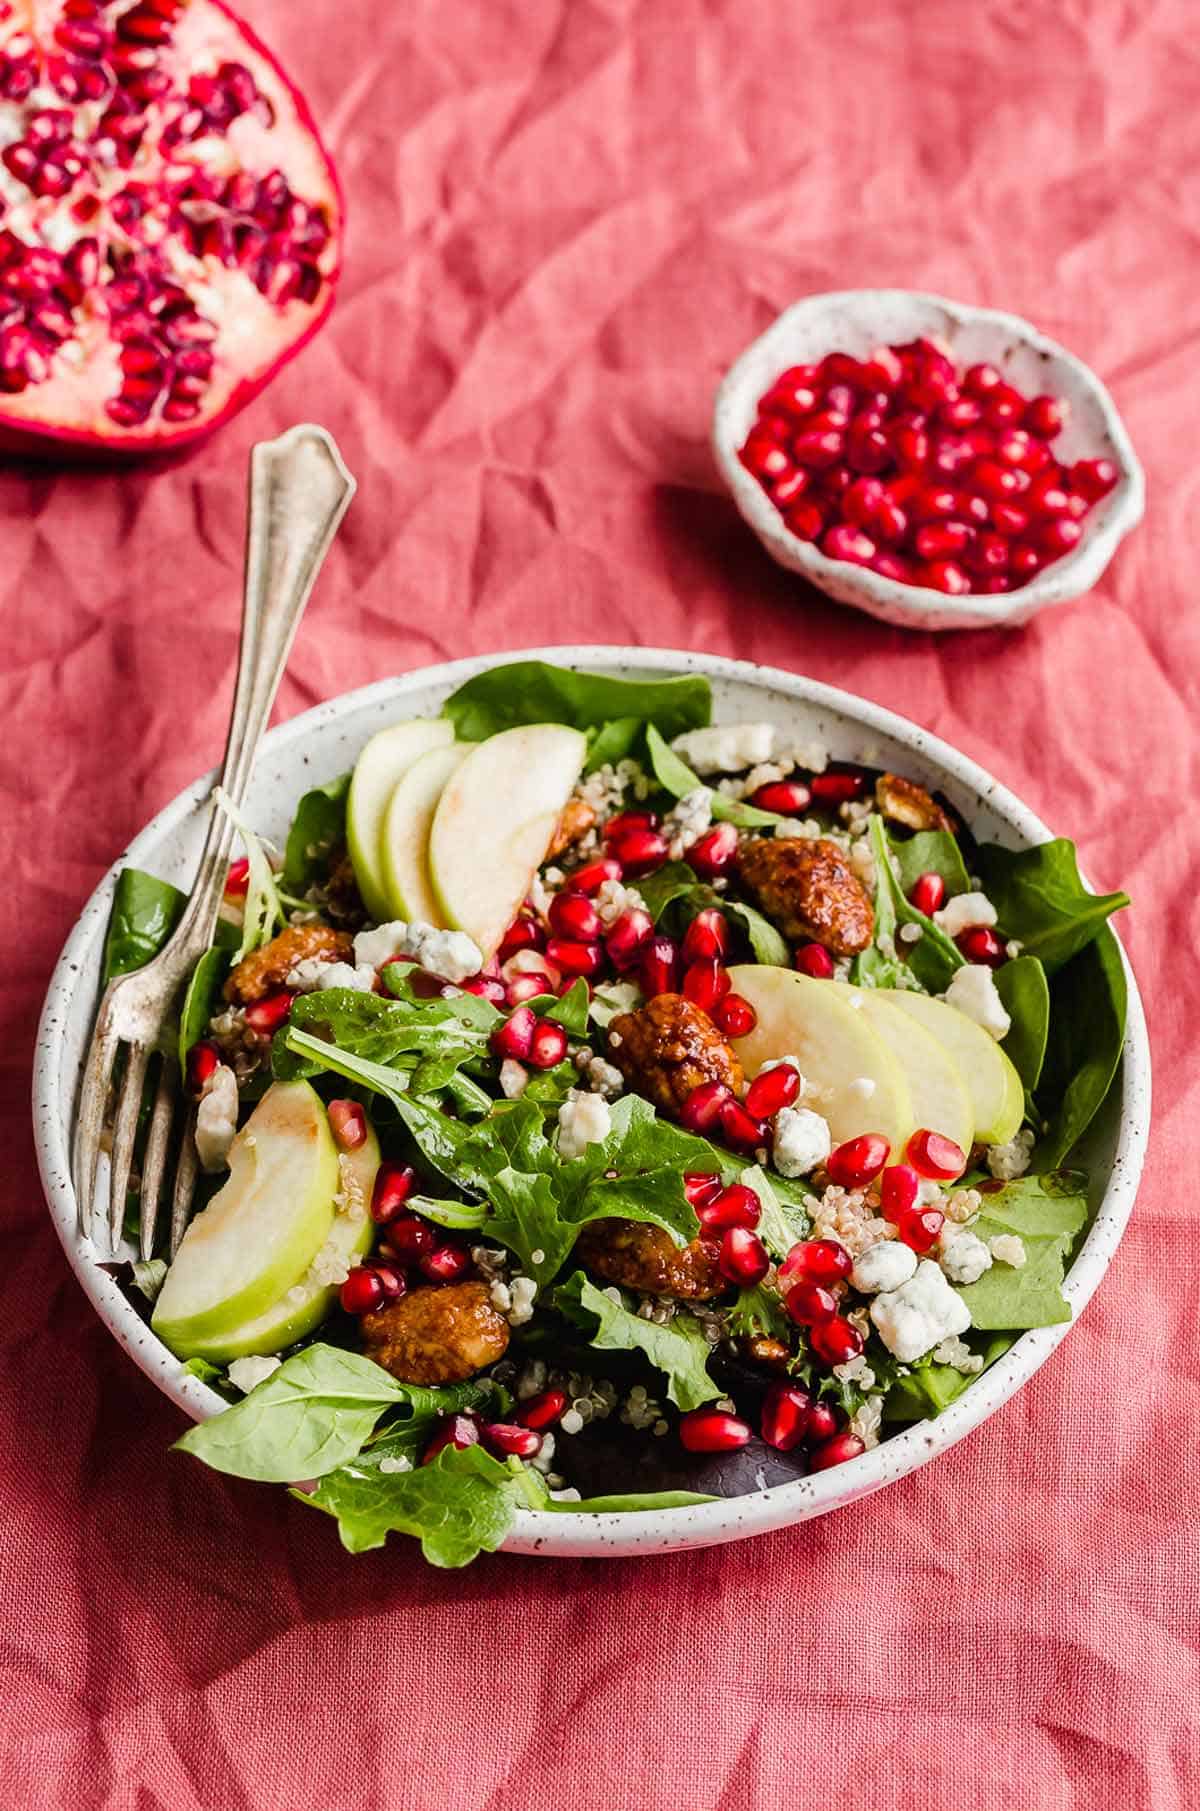 Pomegranate Salad on a white plate on a red background.